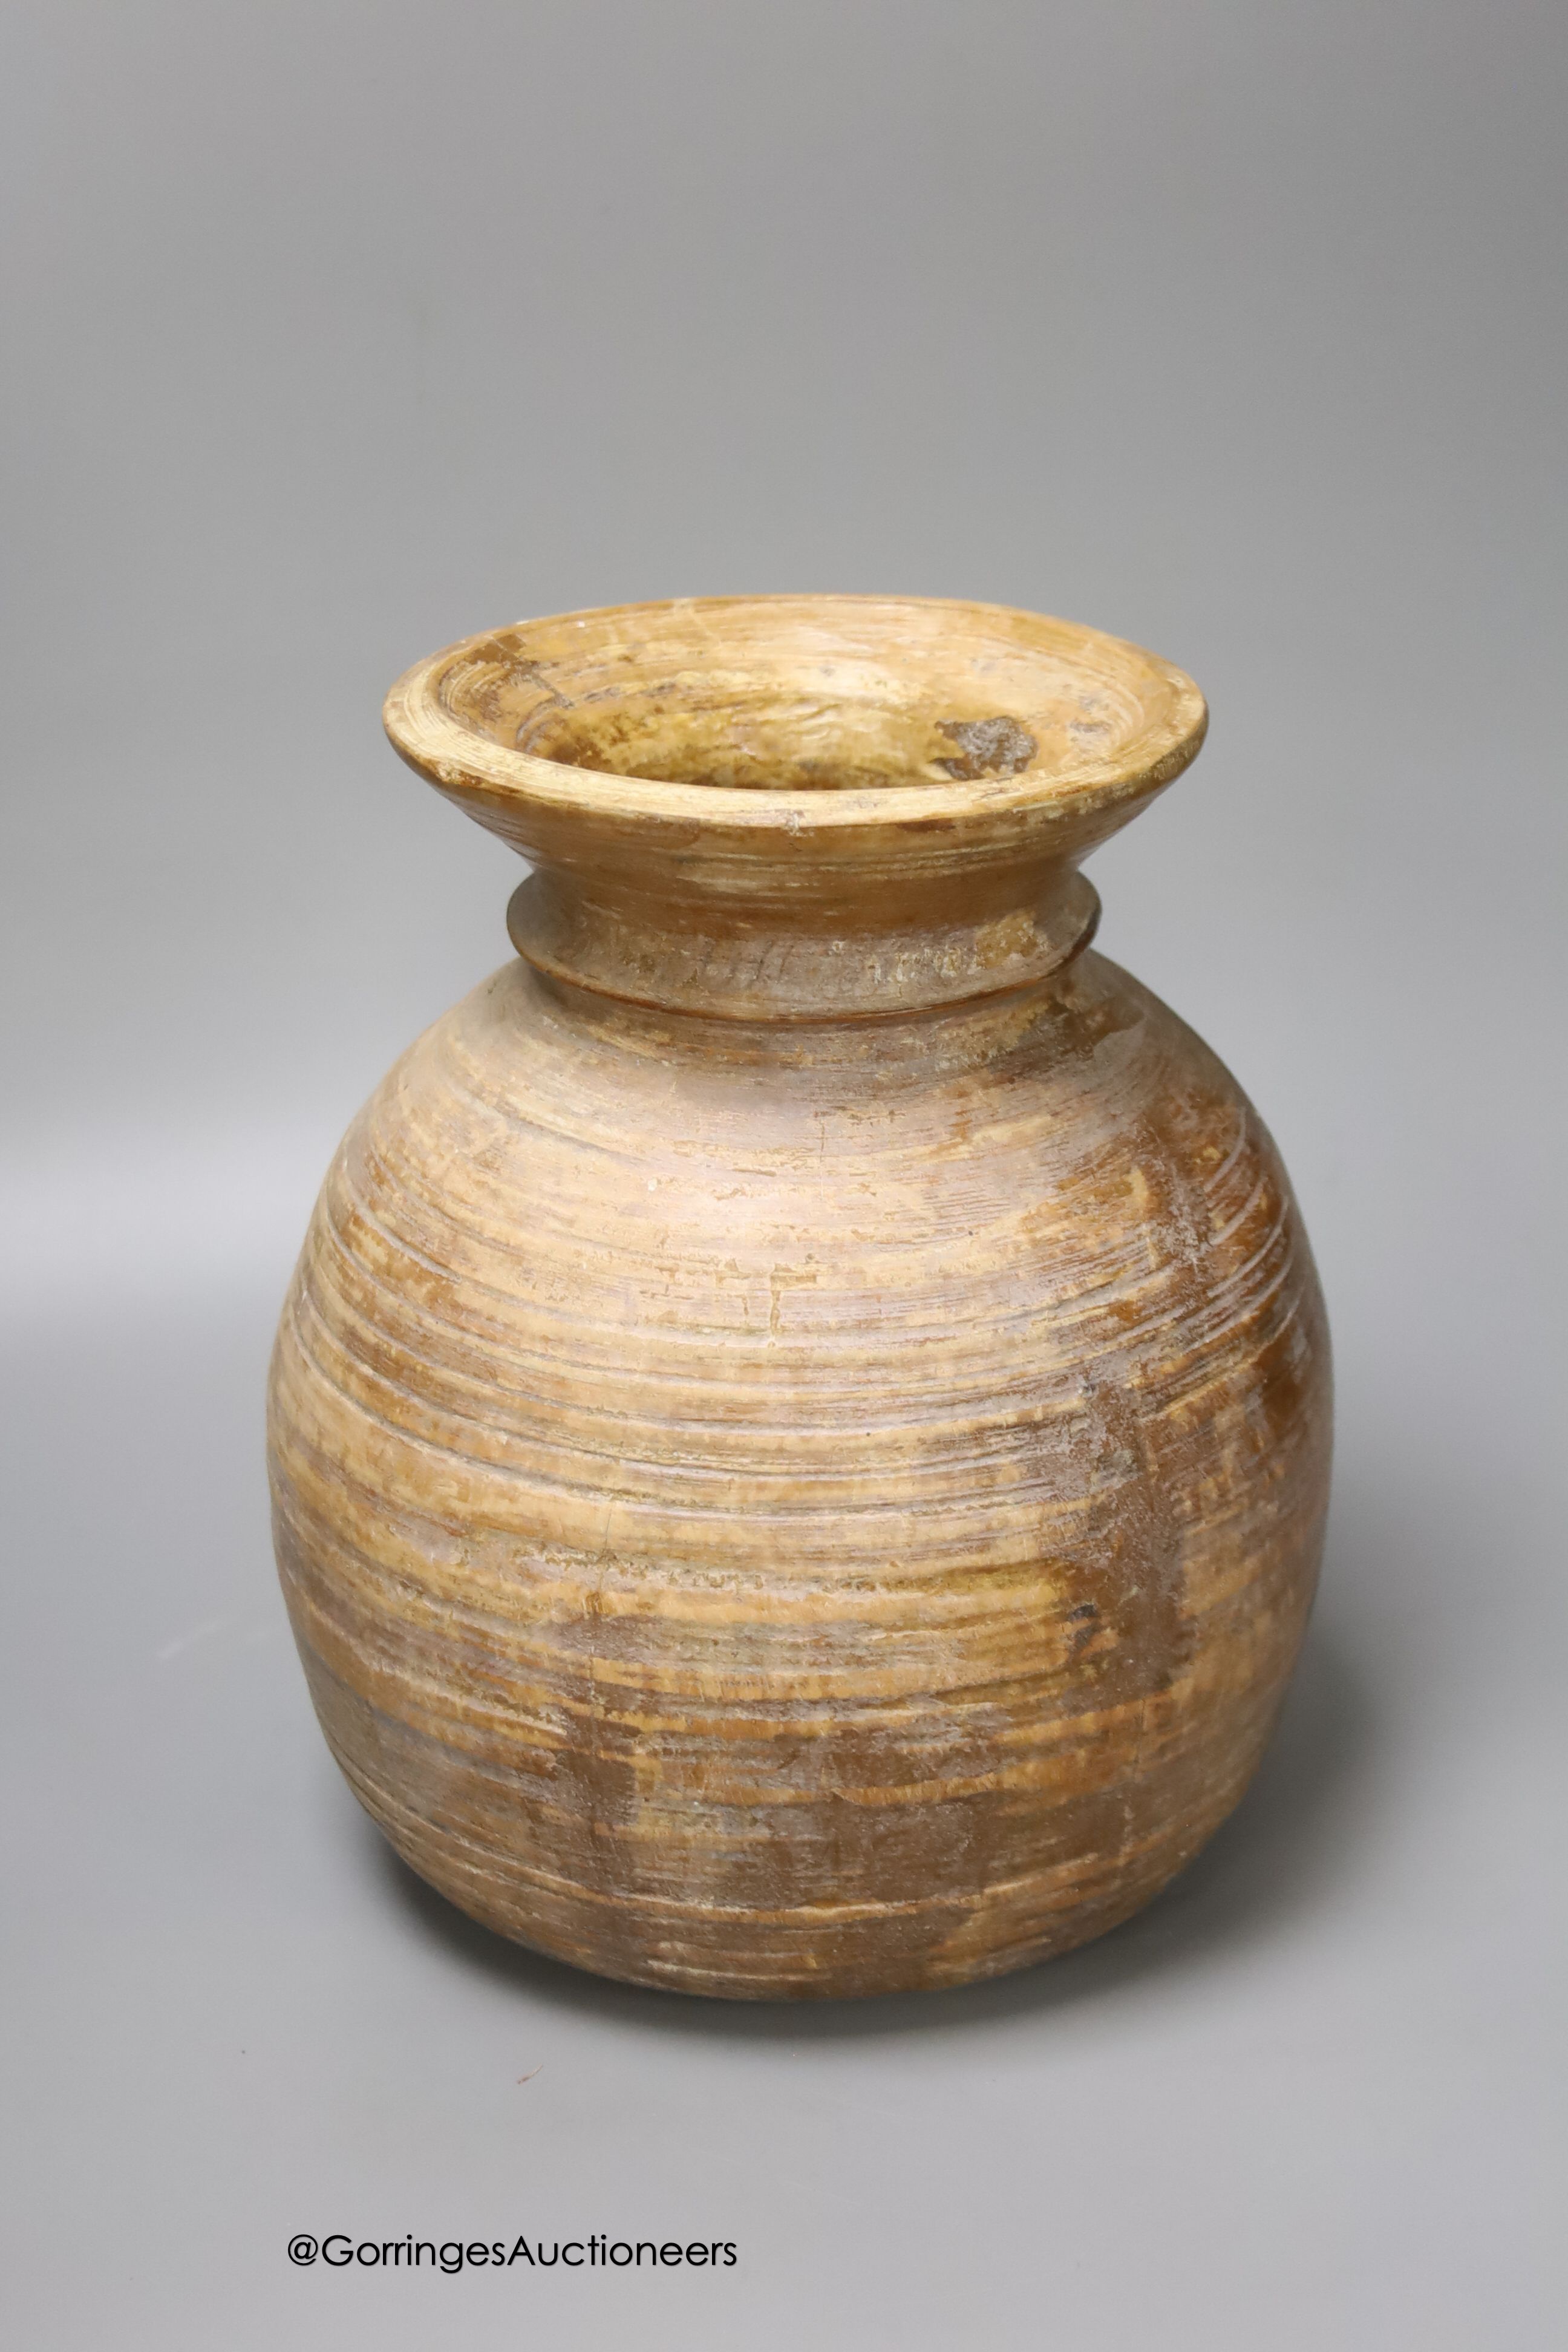 A 17th century continental Tiger ware Bellarmine, 23cm, together with a two handled earthenware bowl, a turned wood bowl and a cylindrical stoneware flask